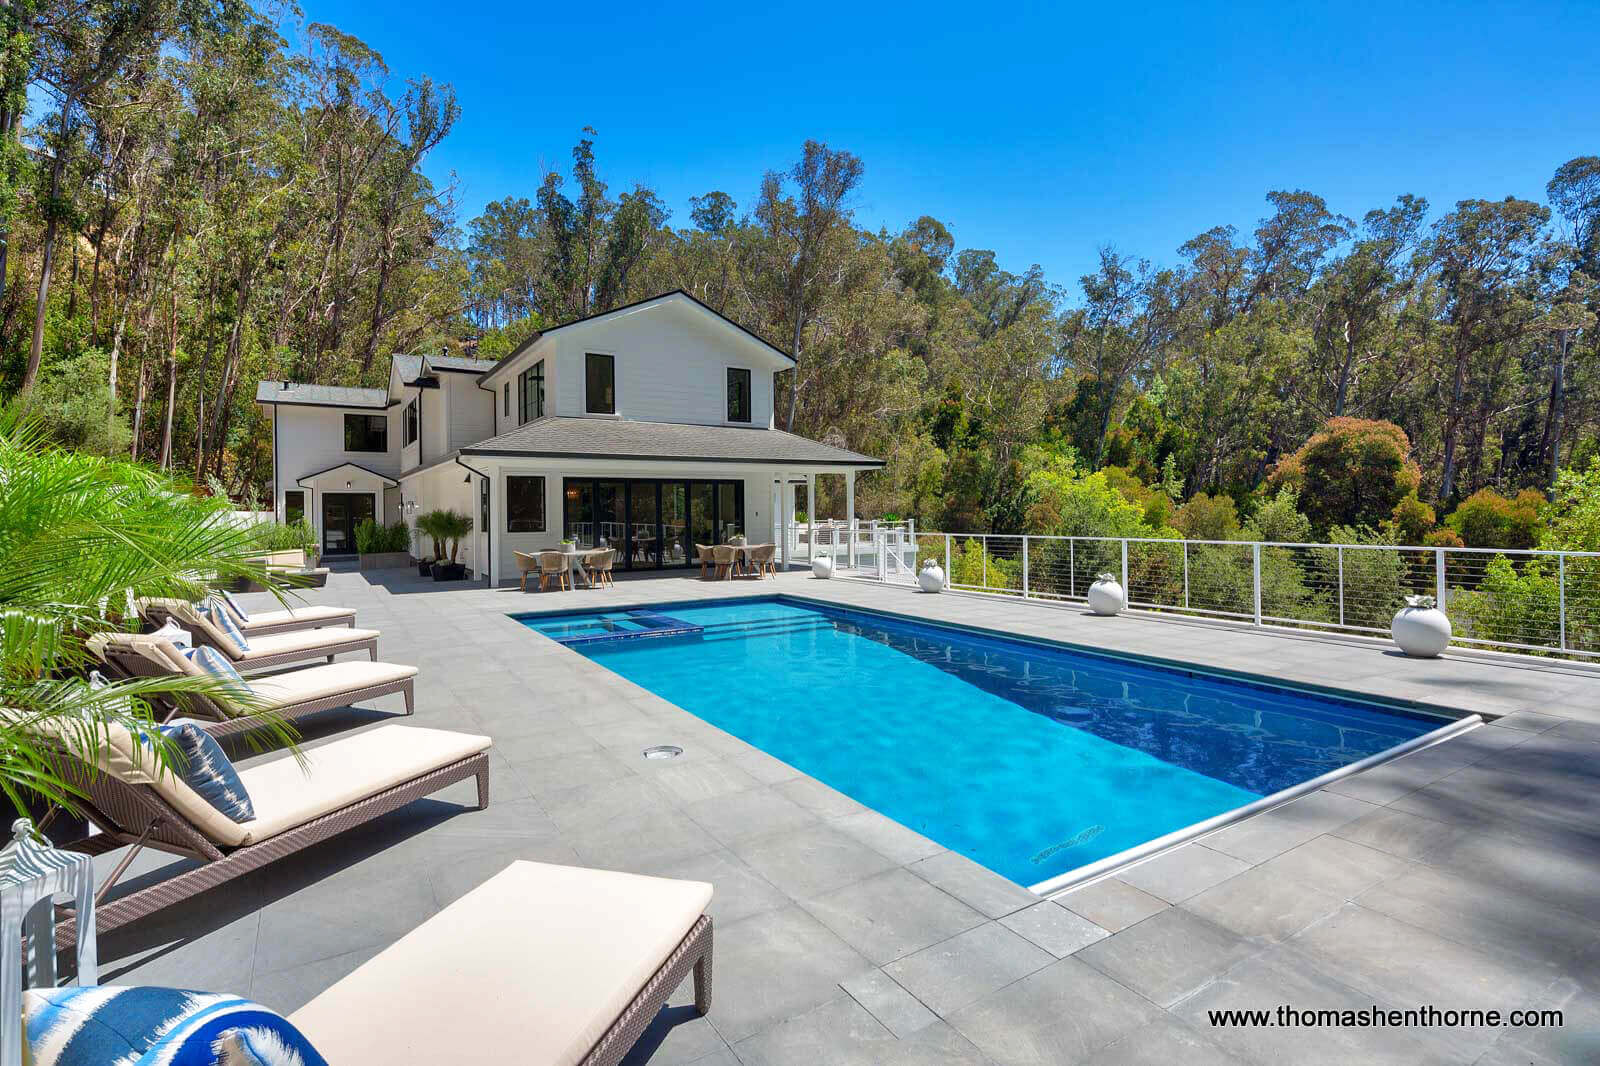 61 Gold Hill Grade in San Rafael, California pool in foreground and home in background